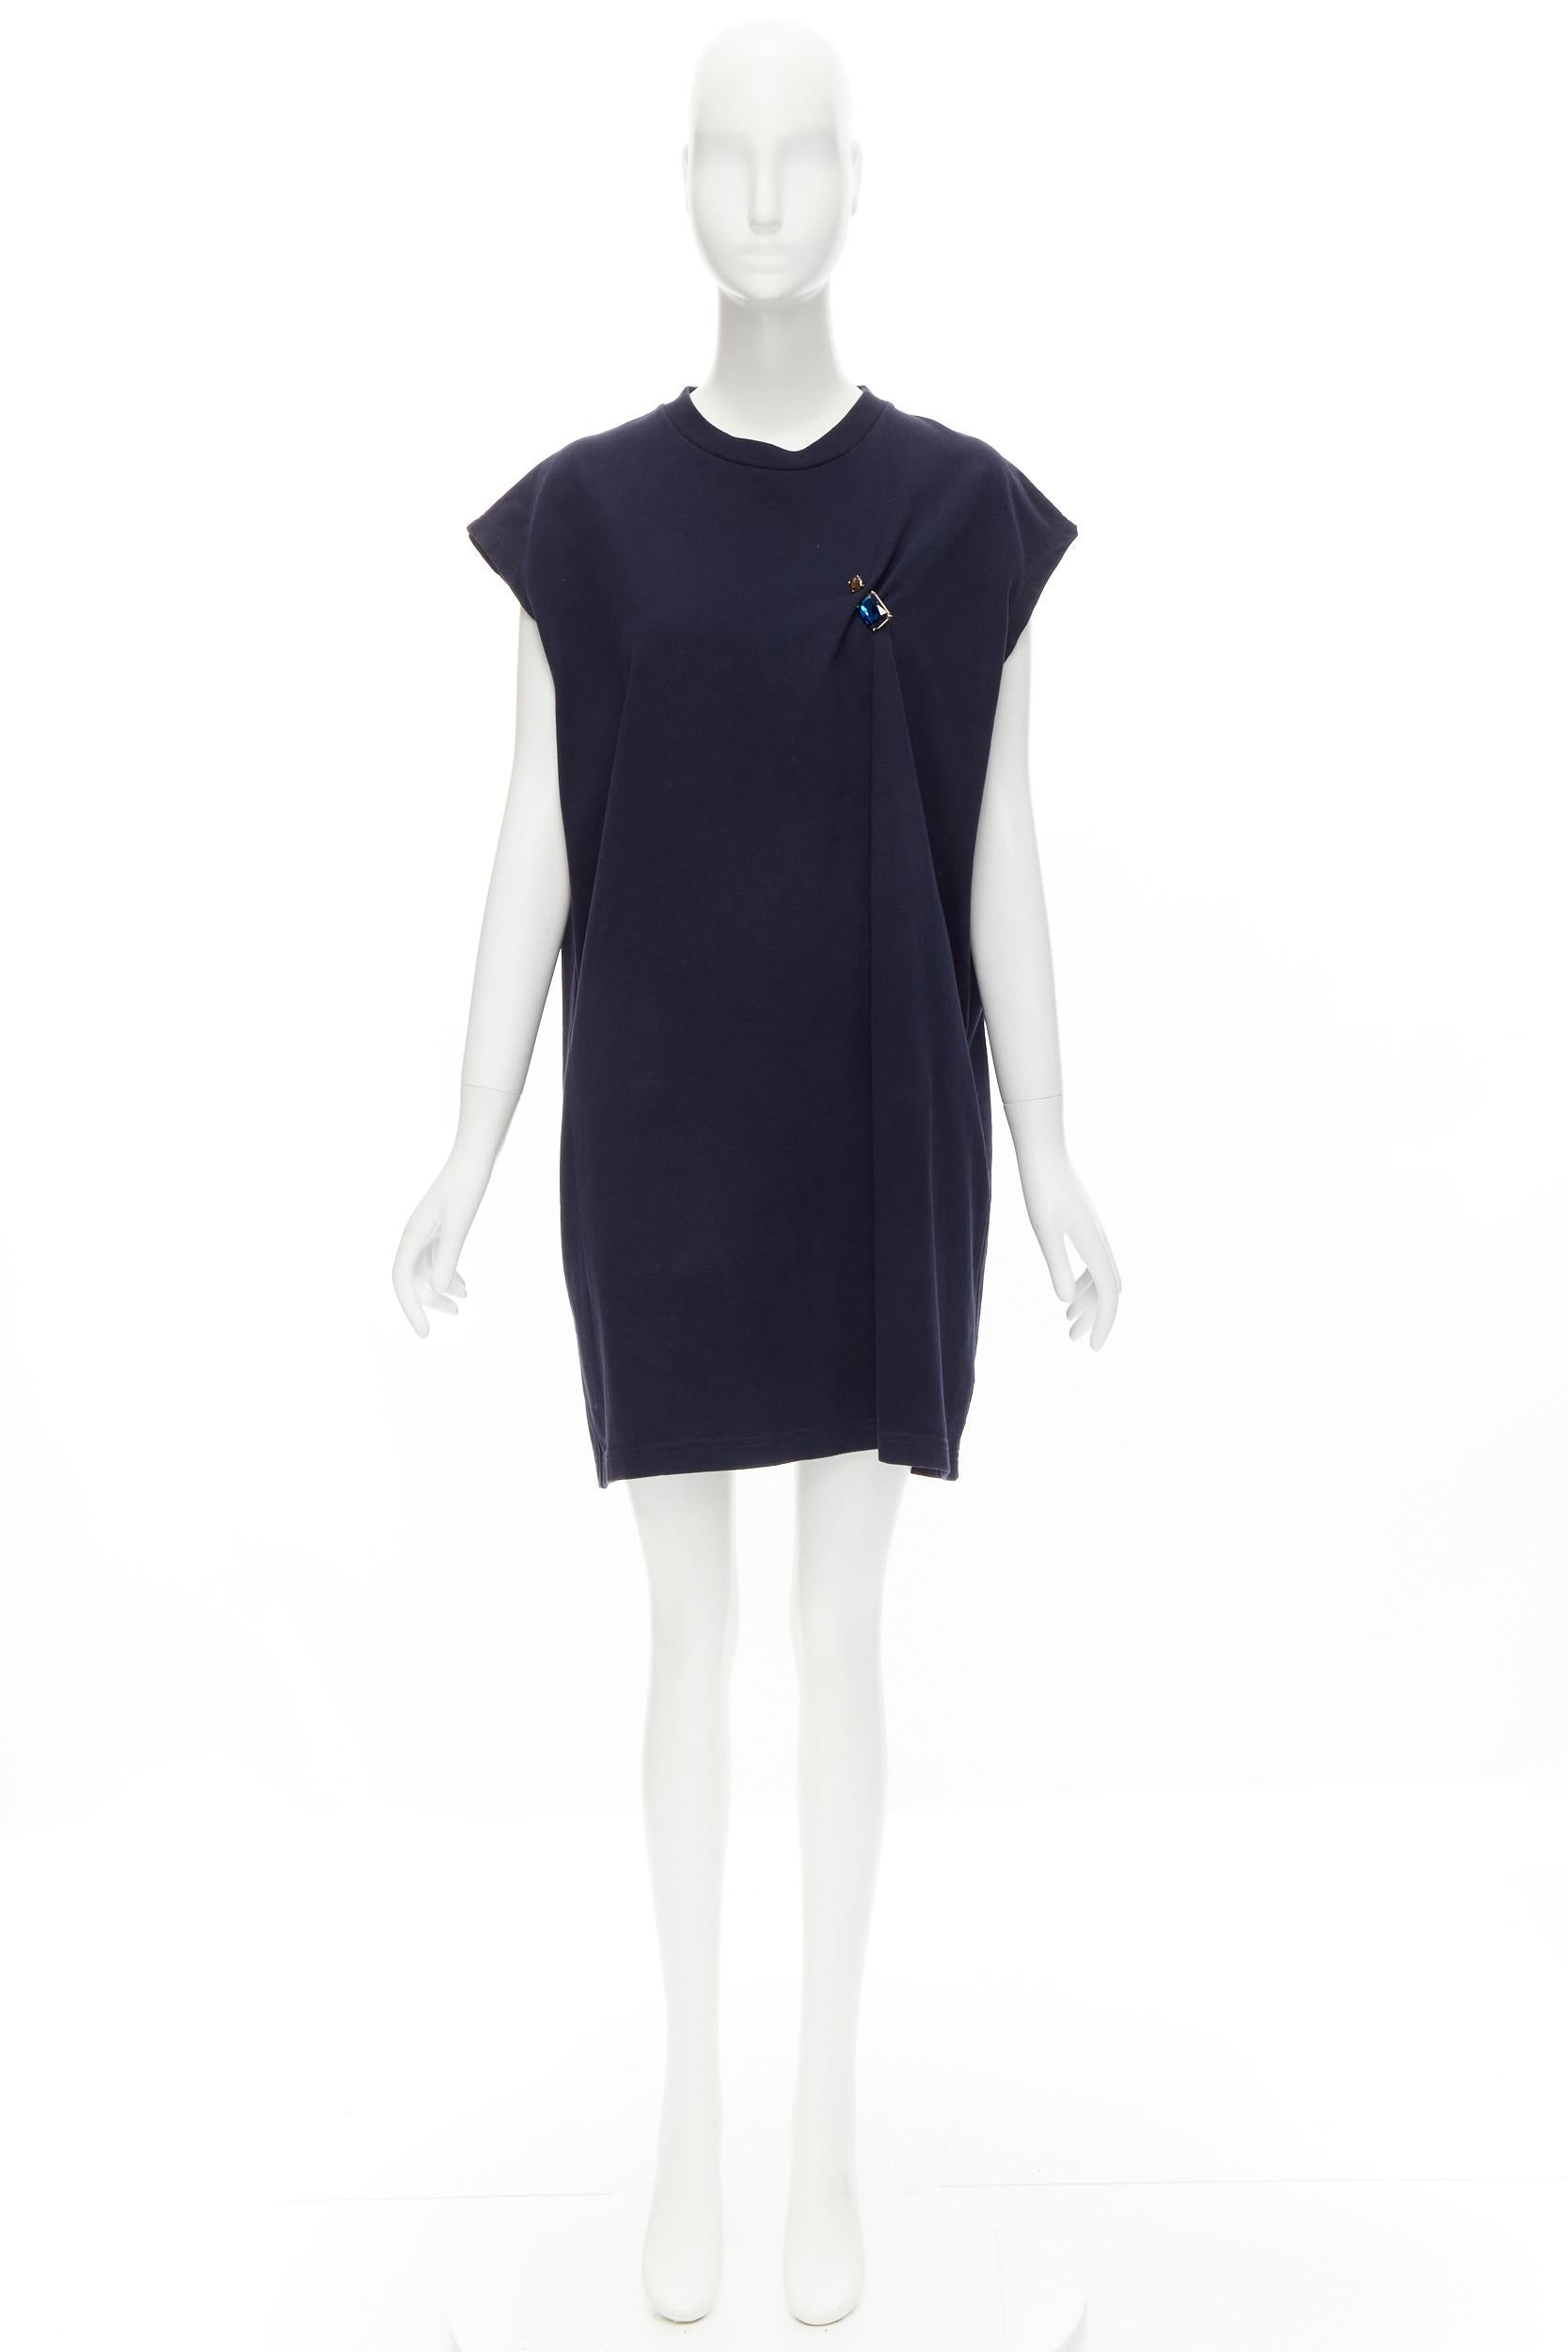 ACNE STUDIOS navy blue cotton jewel pin pinched oversized casual dress XS For Sale 3